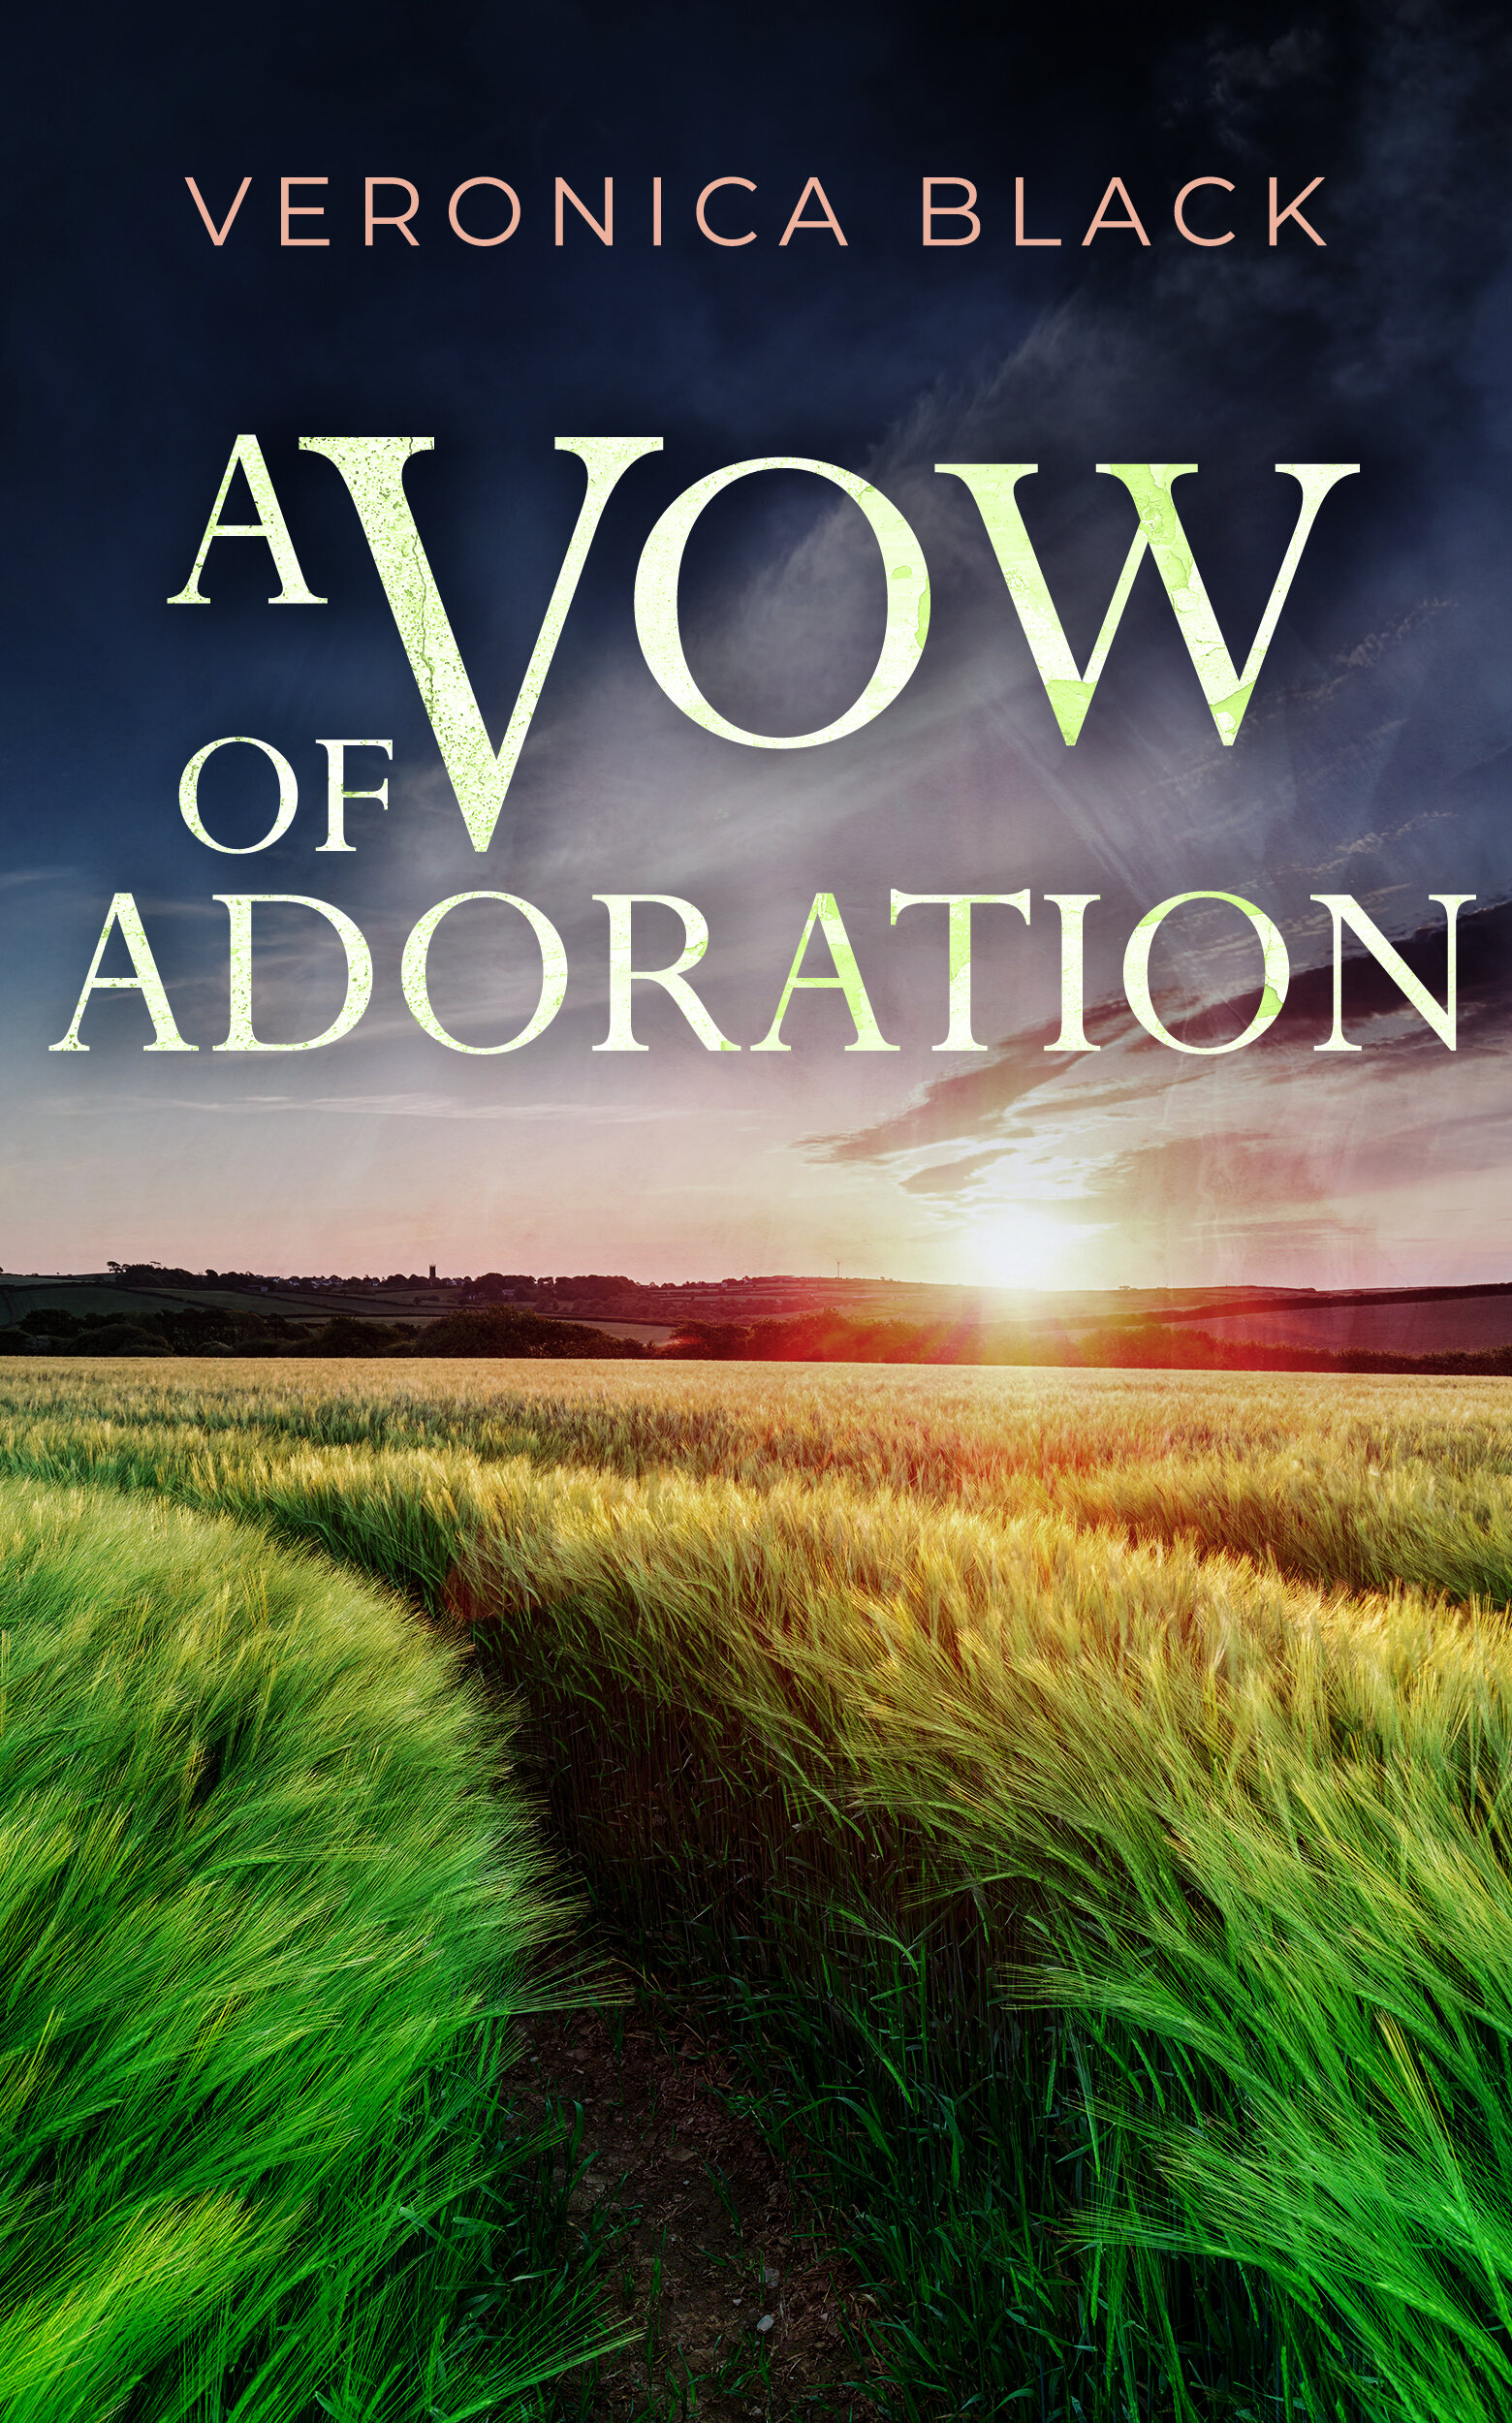 A VOW OF ADORATION publish cover.jpg